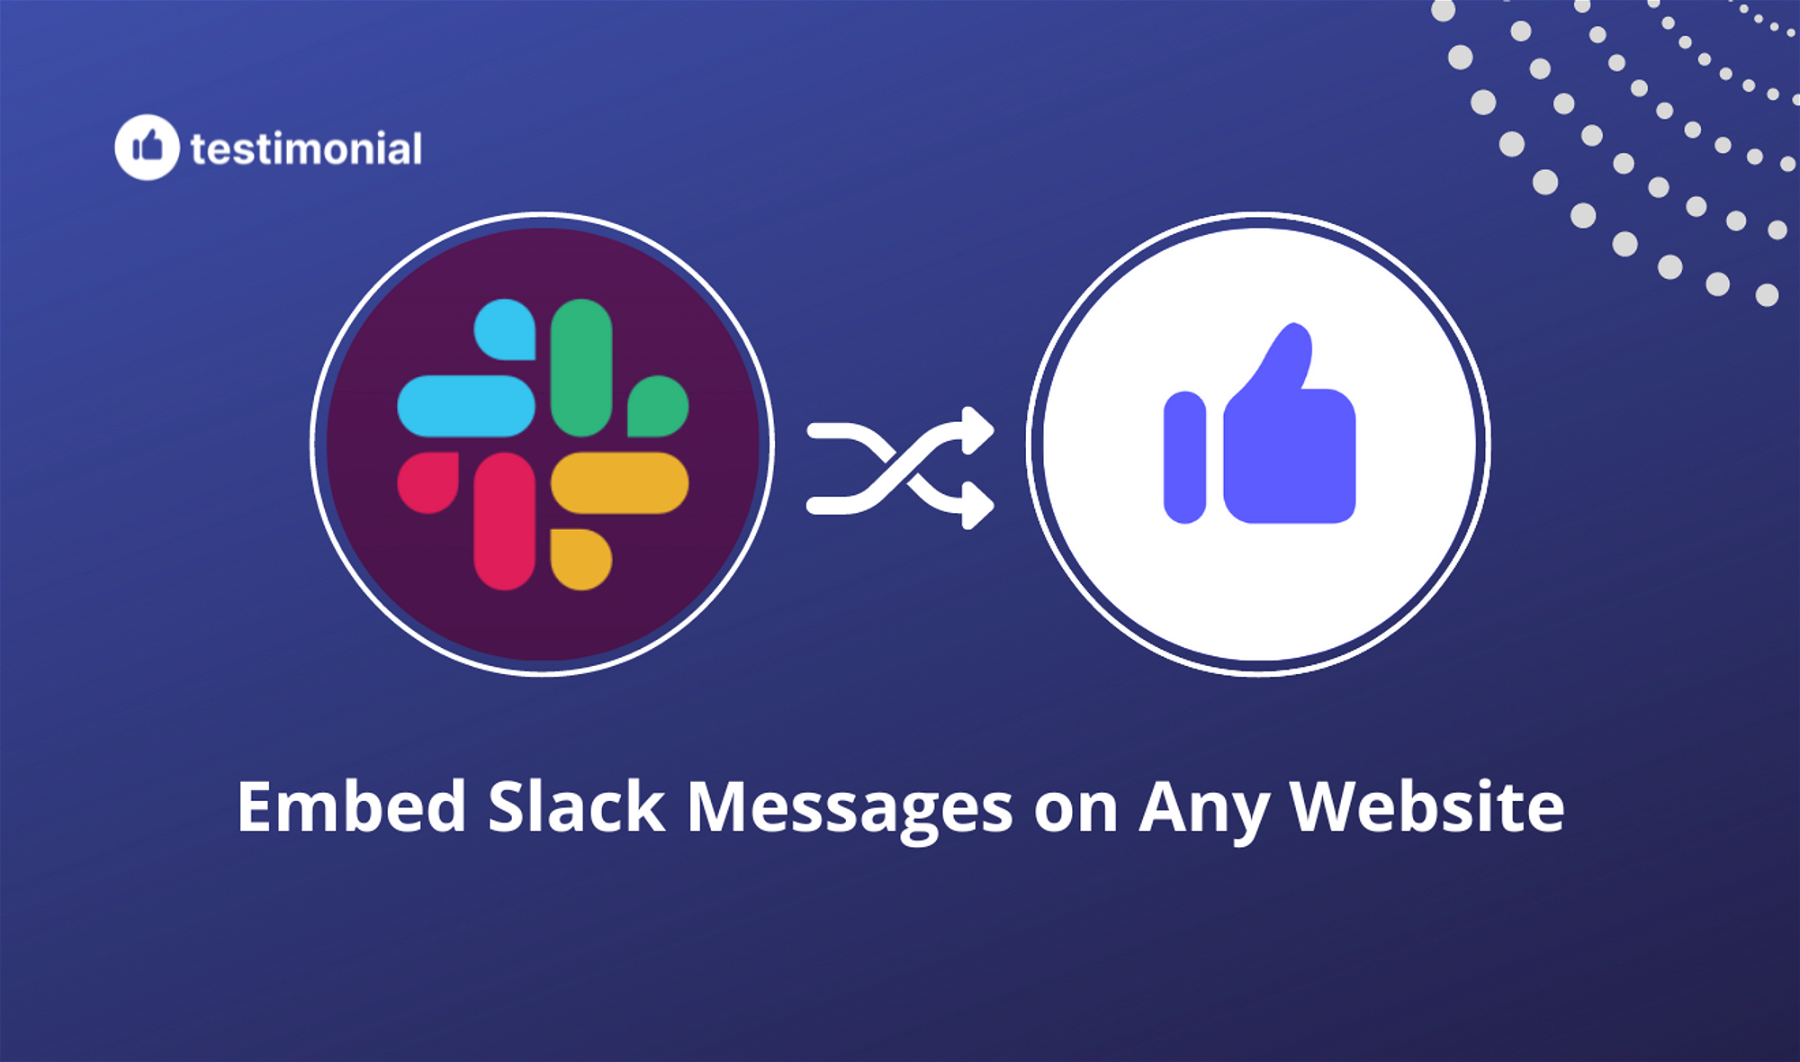 How to turn Slack messages into testimonials